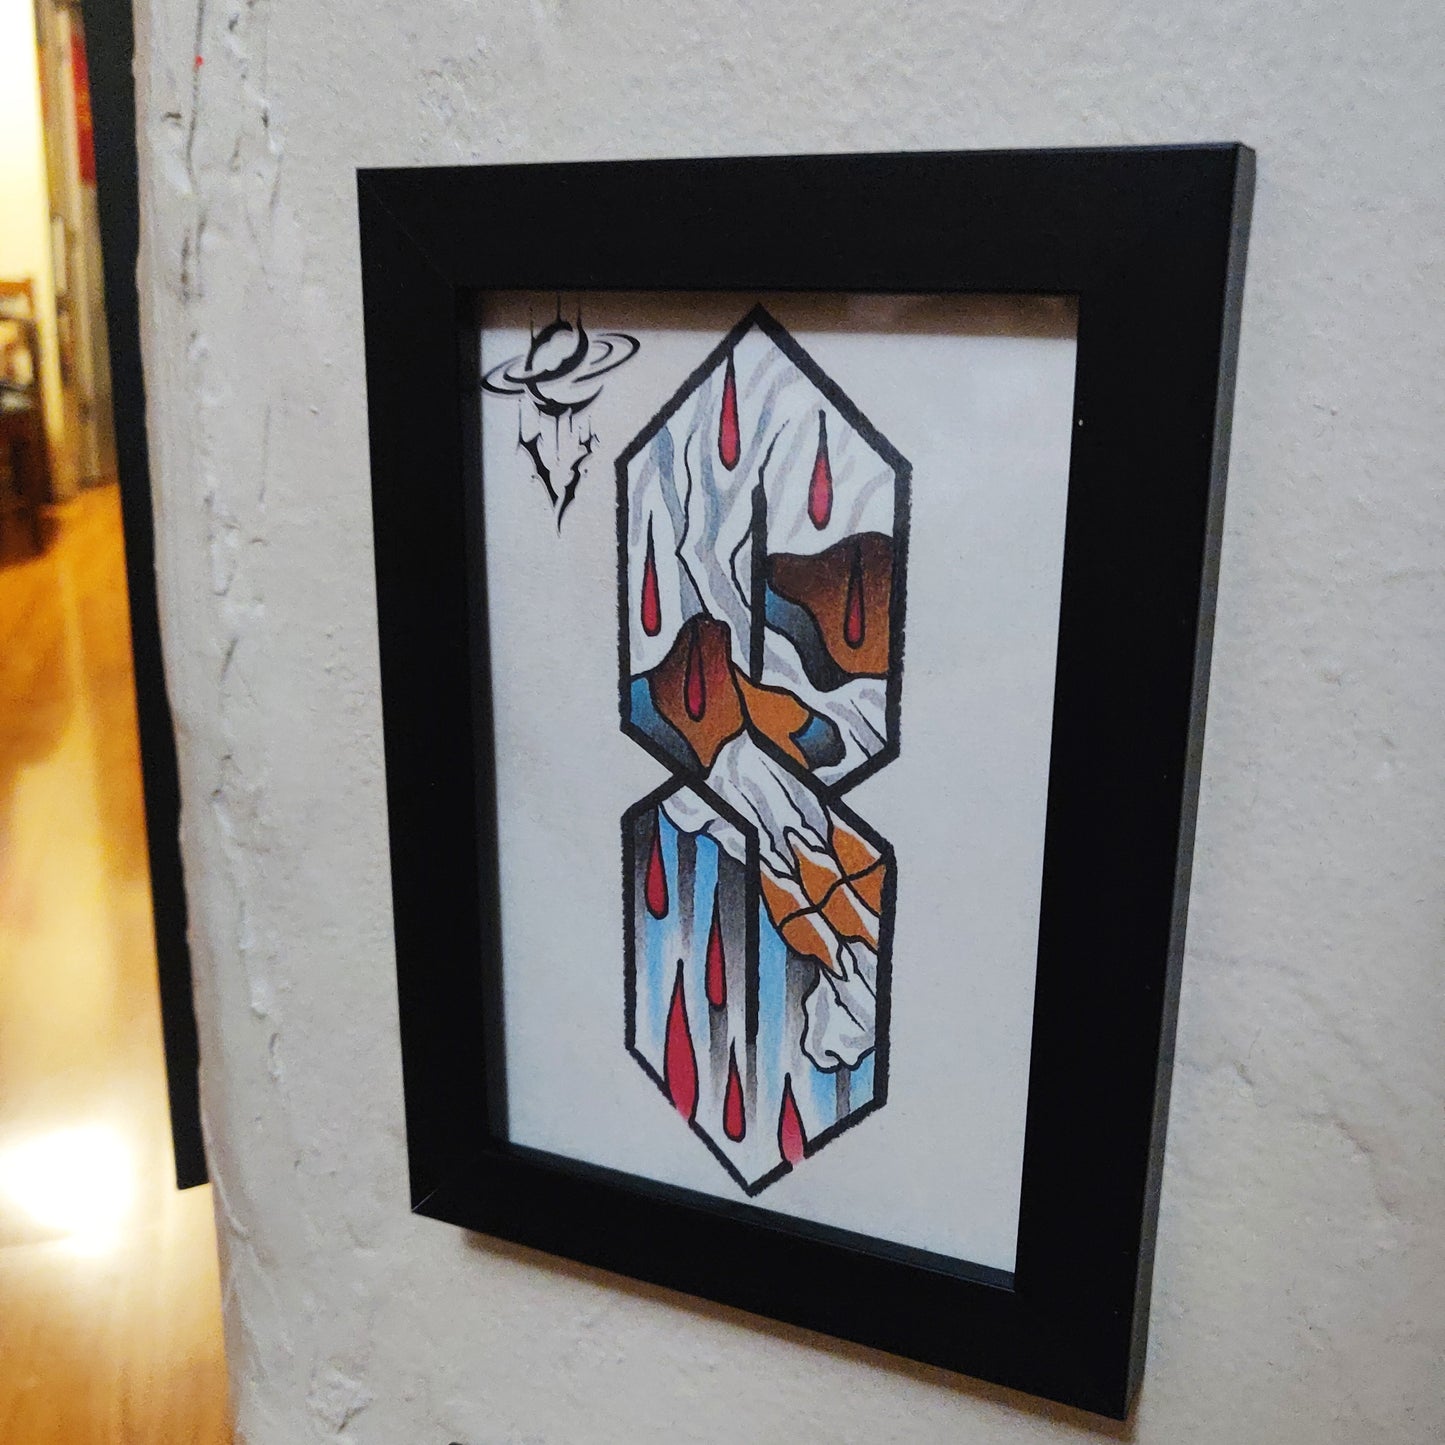 That 90s S Framed PRINTs by Evan Void